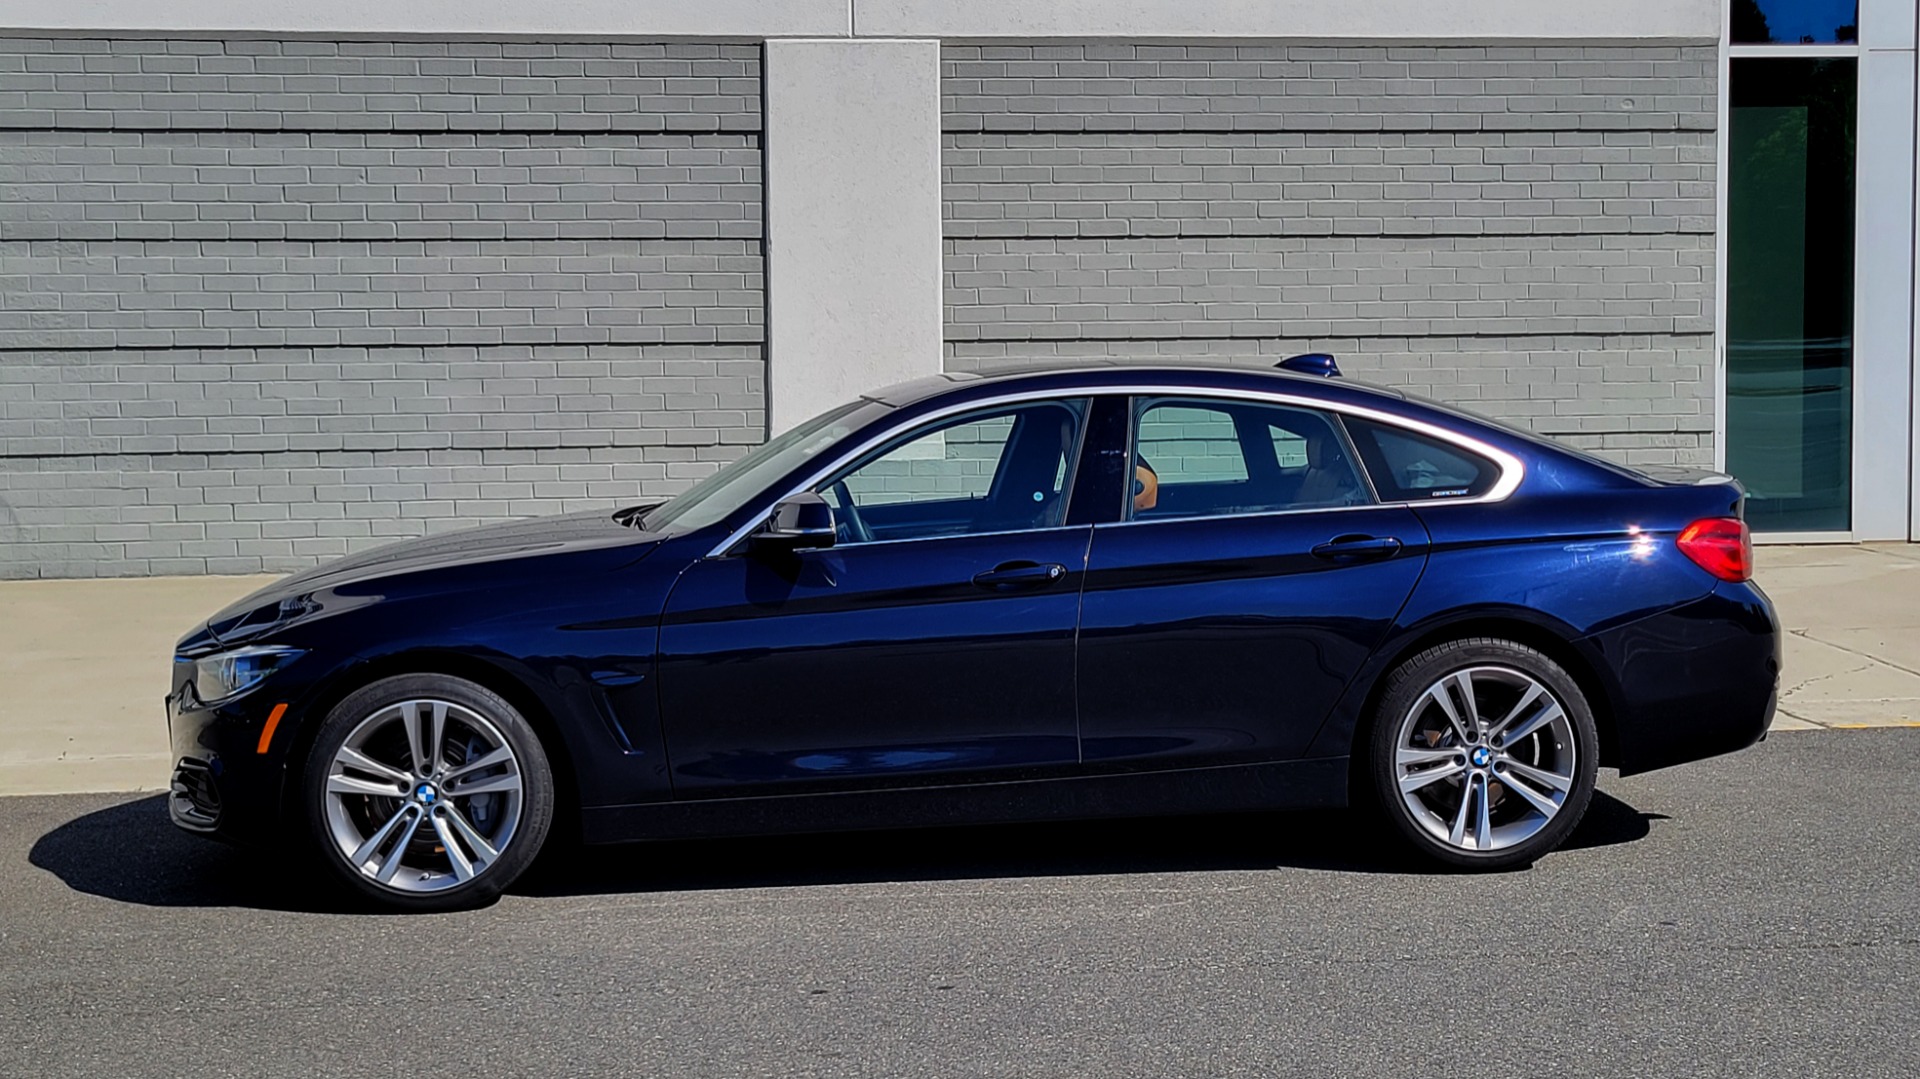 Used 2019 BMW 4 SERIES 440I XDRIVE GRAN COUPE / 3.0L / CONV PKG / HTD STS / REARVIEW for sale $40,995 at Formula Imports in Charlotte NC 28227 4